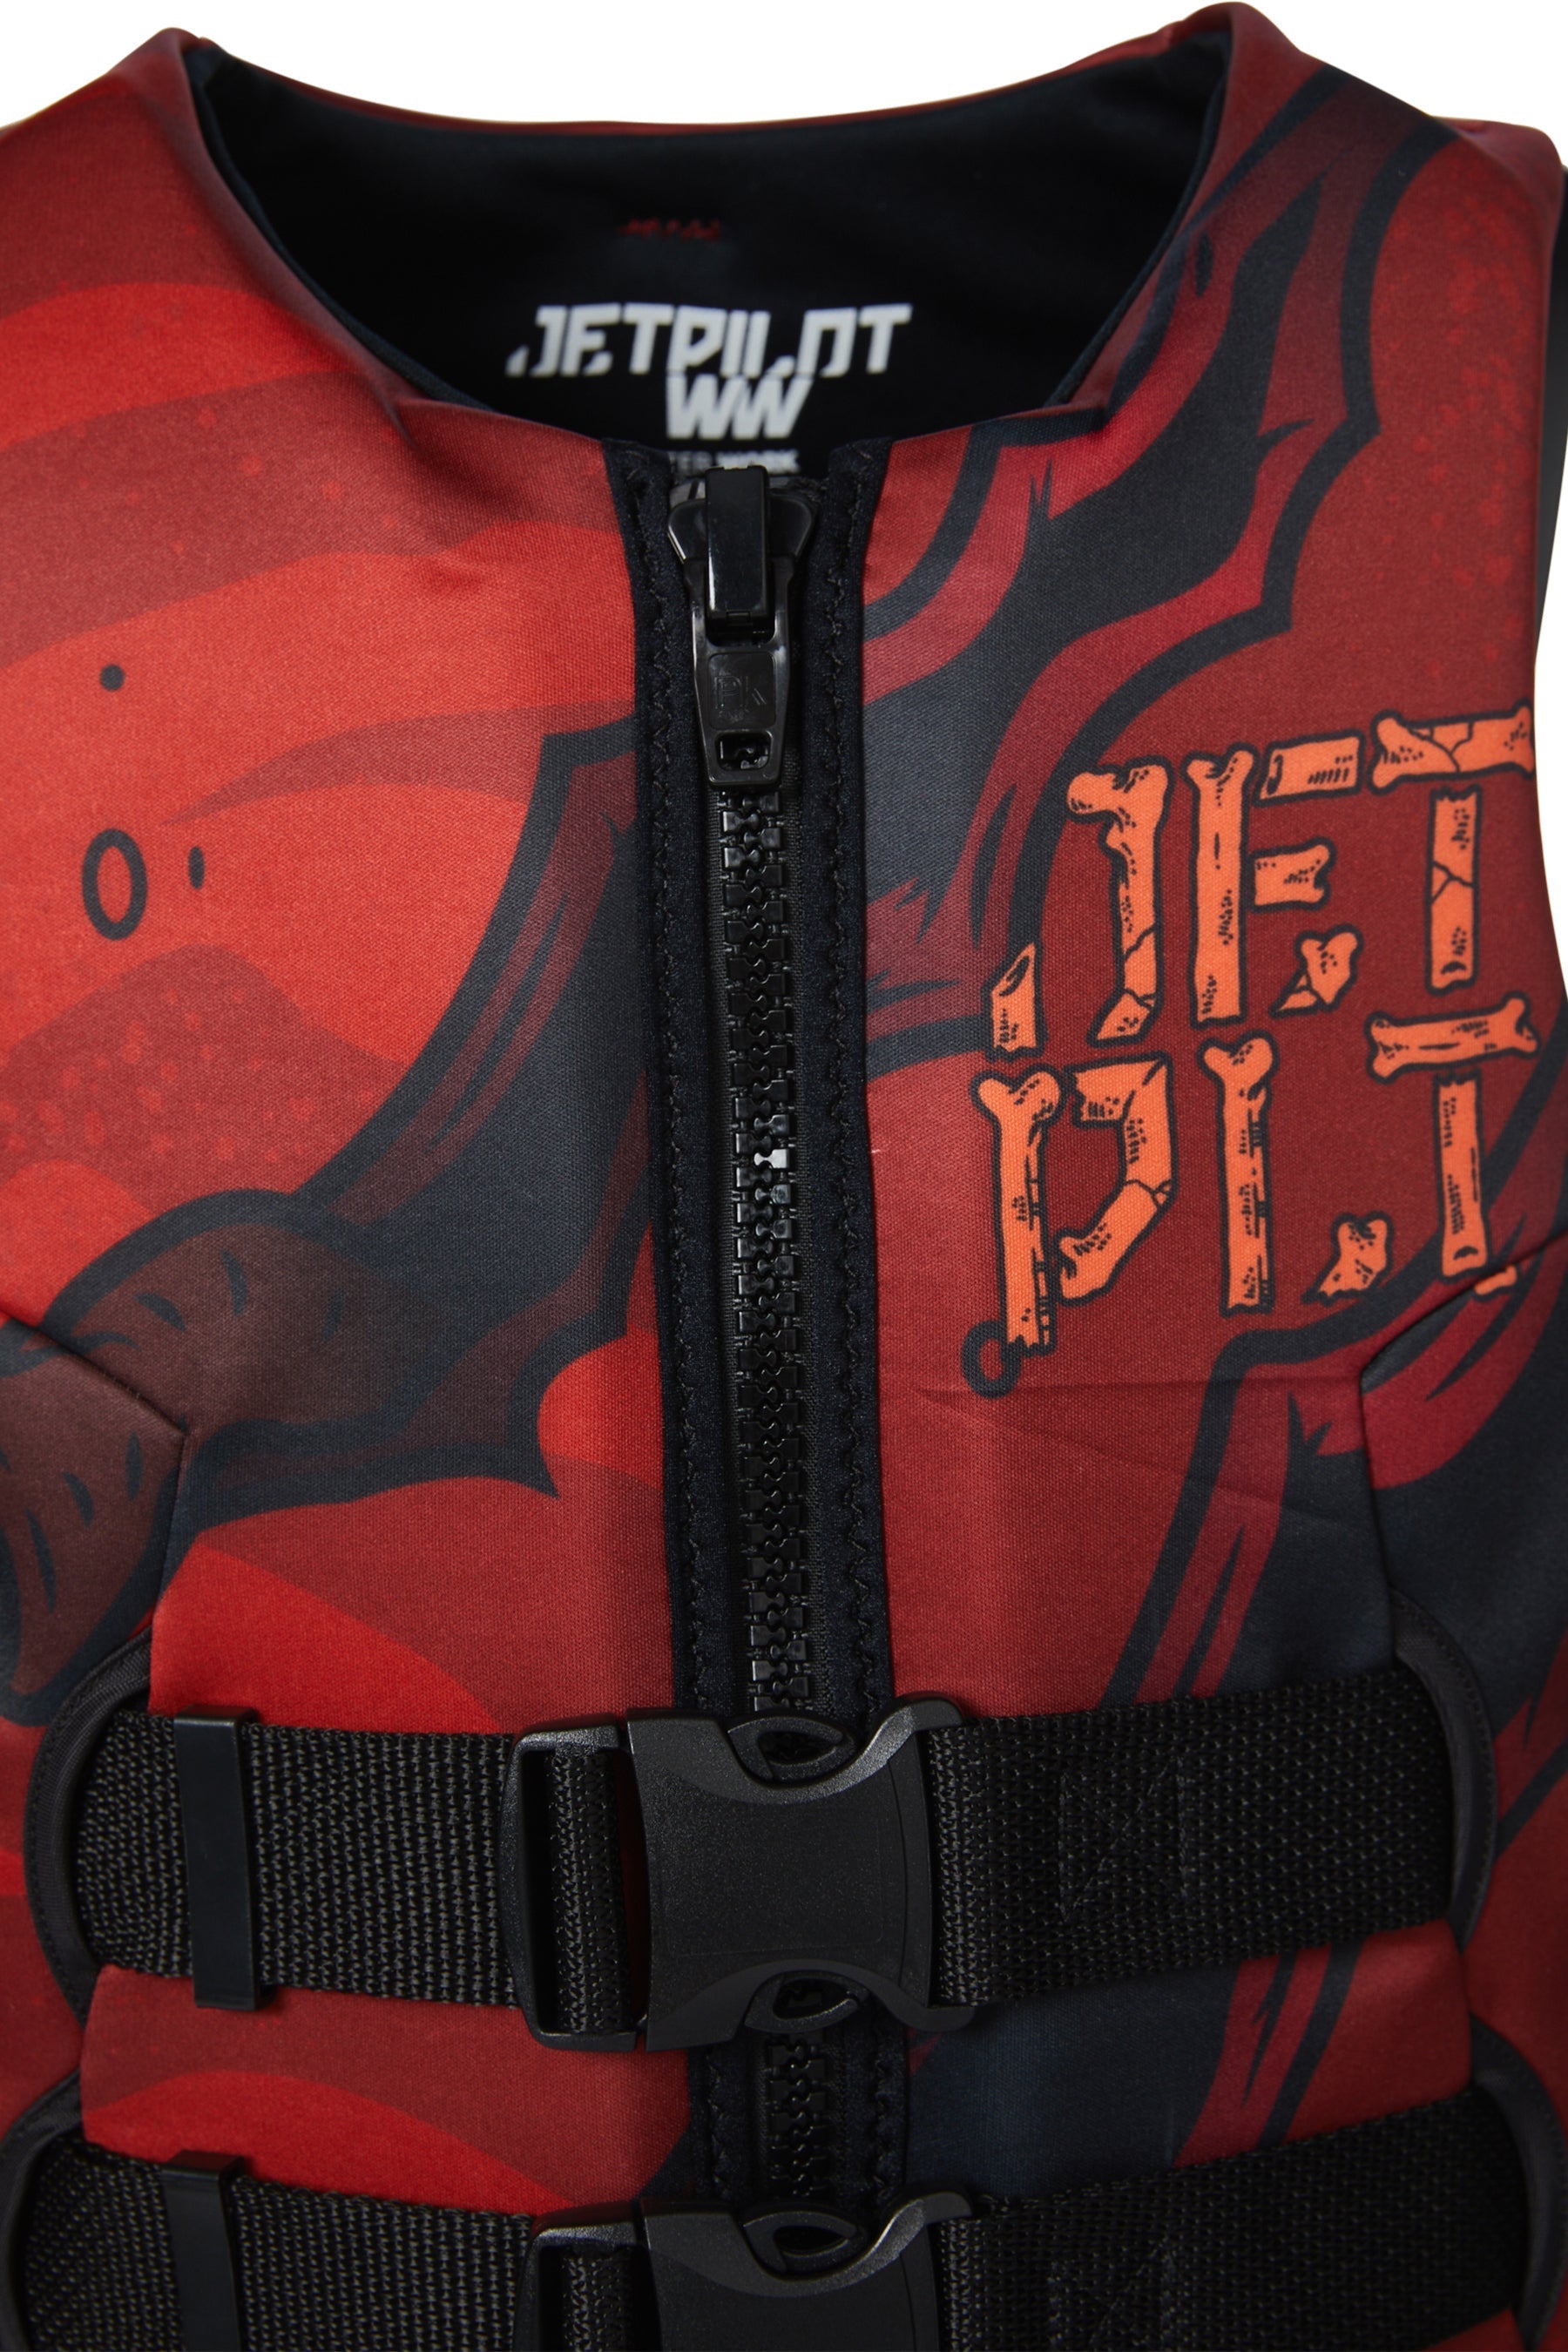 Jetpilot Boys Rex Youth Cause Neo Life Jacket Red 4